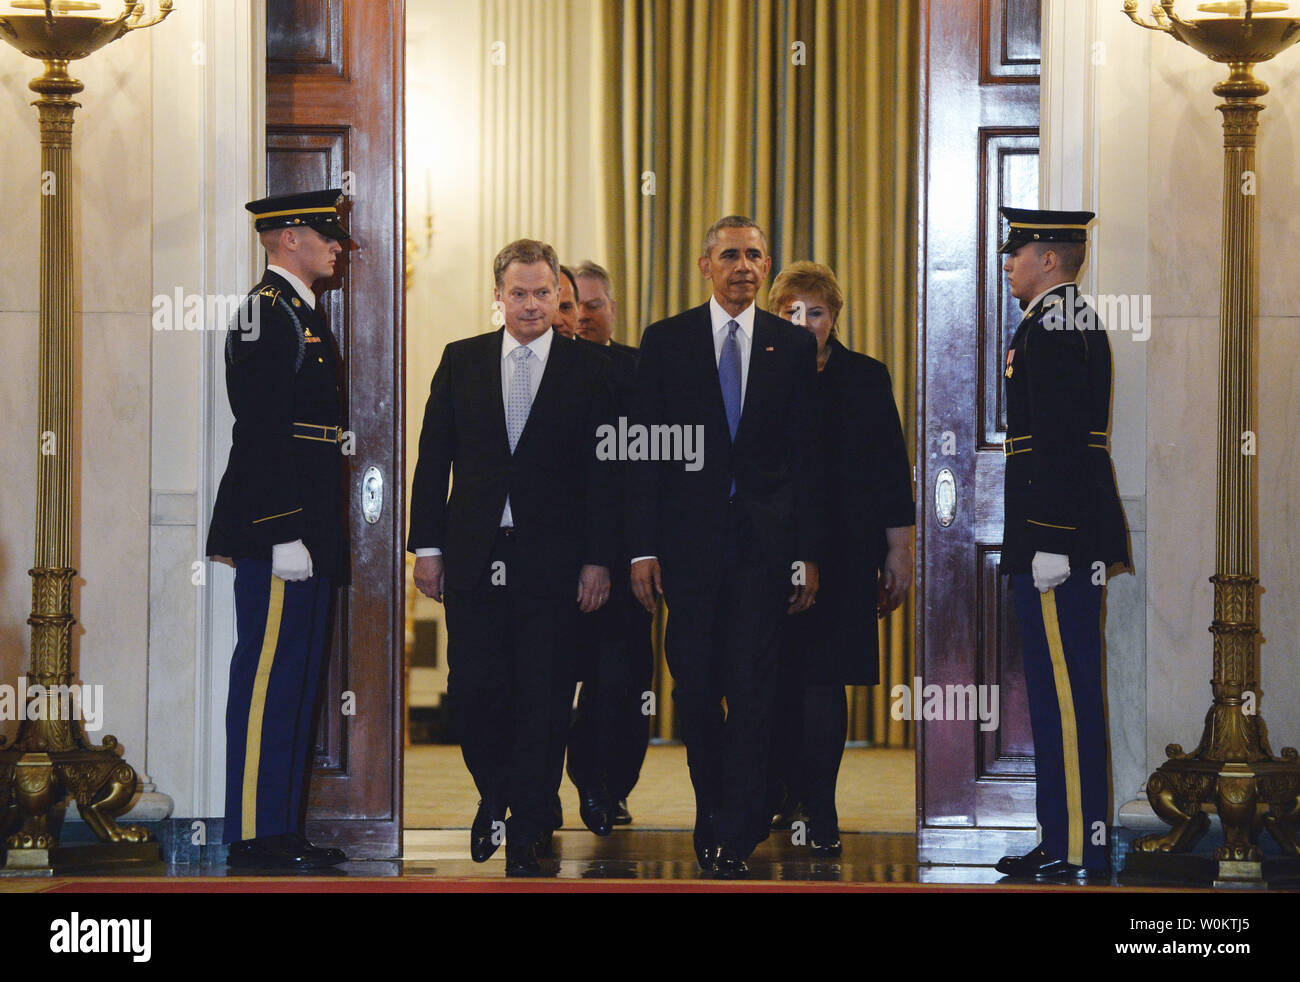 U.S. President Barack Obama (R) escorts Finland President Sauli Niinisto (L) and other Nortic leaders Iceland Prime Minister Sigurdur Ingi Johannsson, Denmark Prime Minister Lars Lokke Rasmussen, Sweden Prime Minister Stefan Lofven and Norway Prime Minister Erna Solberg in in the Cross Hall during official welcoming ceremonies at the White House in Washington, D.C. on May 13, 2016.     Photo by Pat Benic/UPI Stock Photo